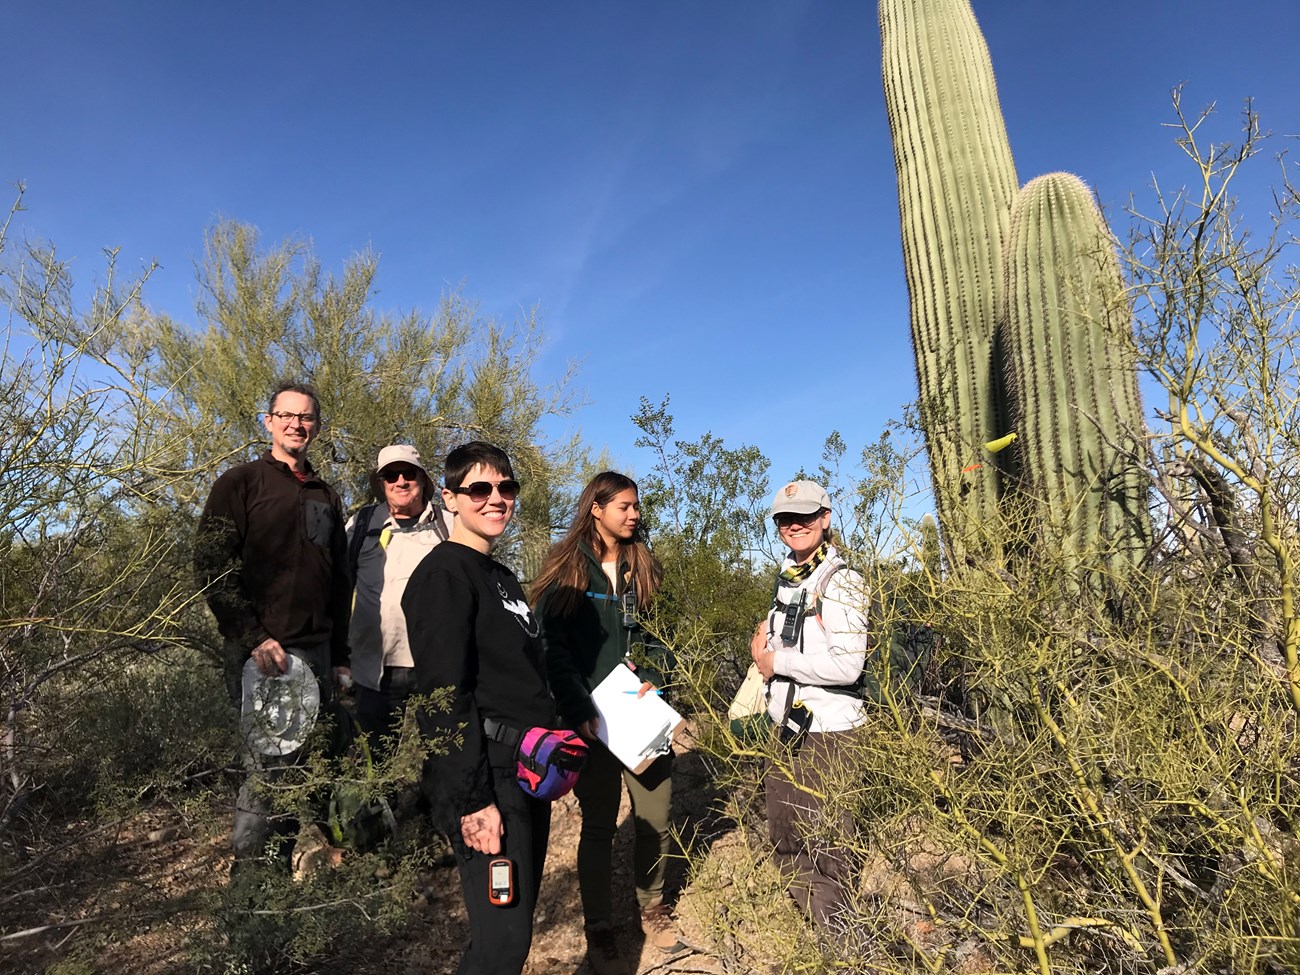 Volunteers and park staff excited to begin the saguaro survey